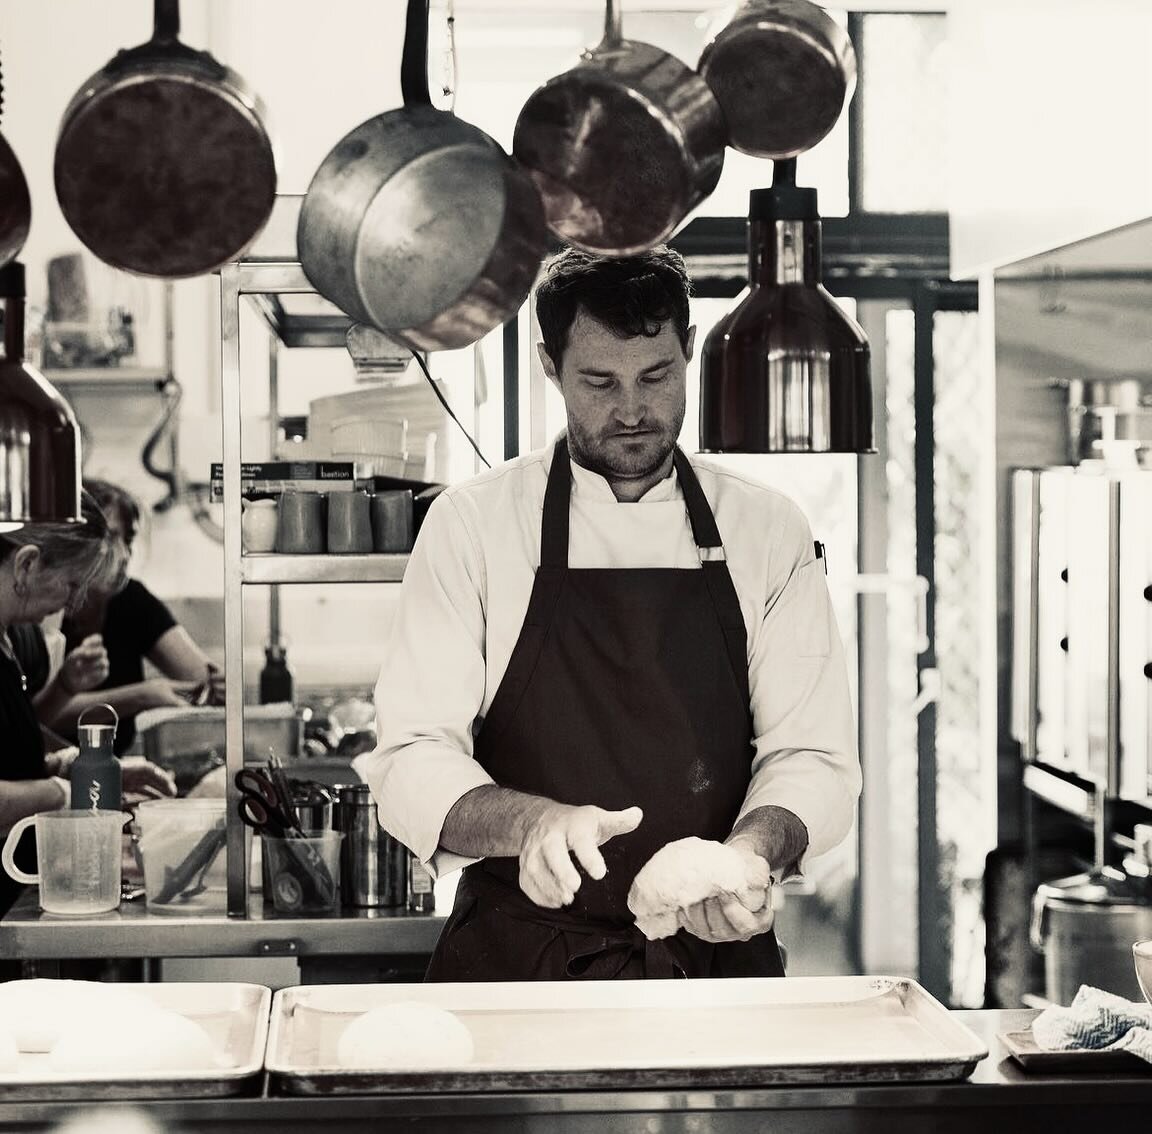 Meet Jack Madden, Owner &amp; Executive Chef at BASK.

From studying environmental engineering to diving into the culinary world, Jack&rsquo;s journey is as diverse as his dishes. Falling into the industry at a young age while working at a pizzeria, 